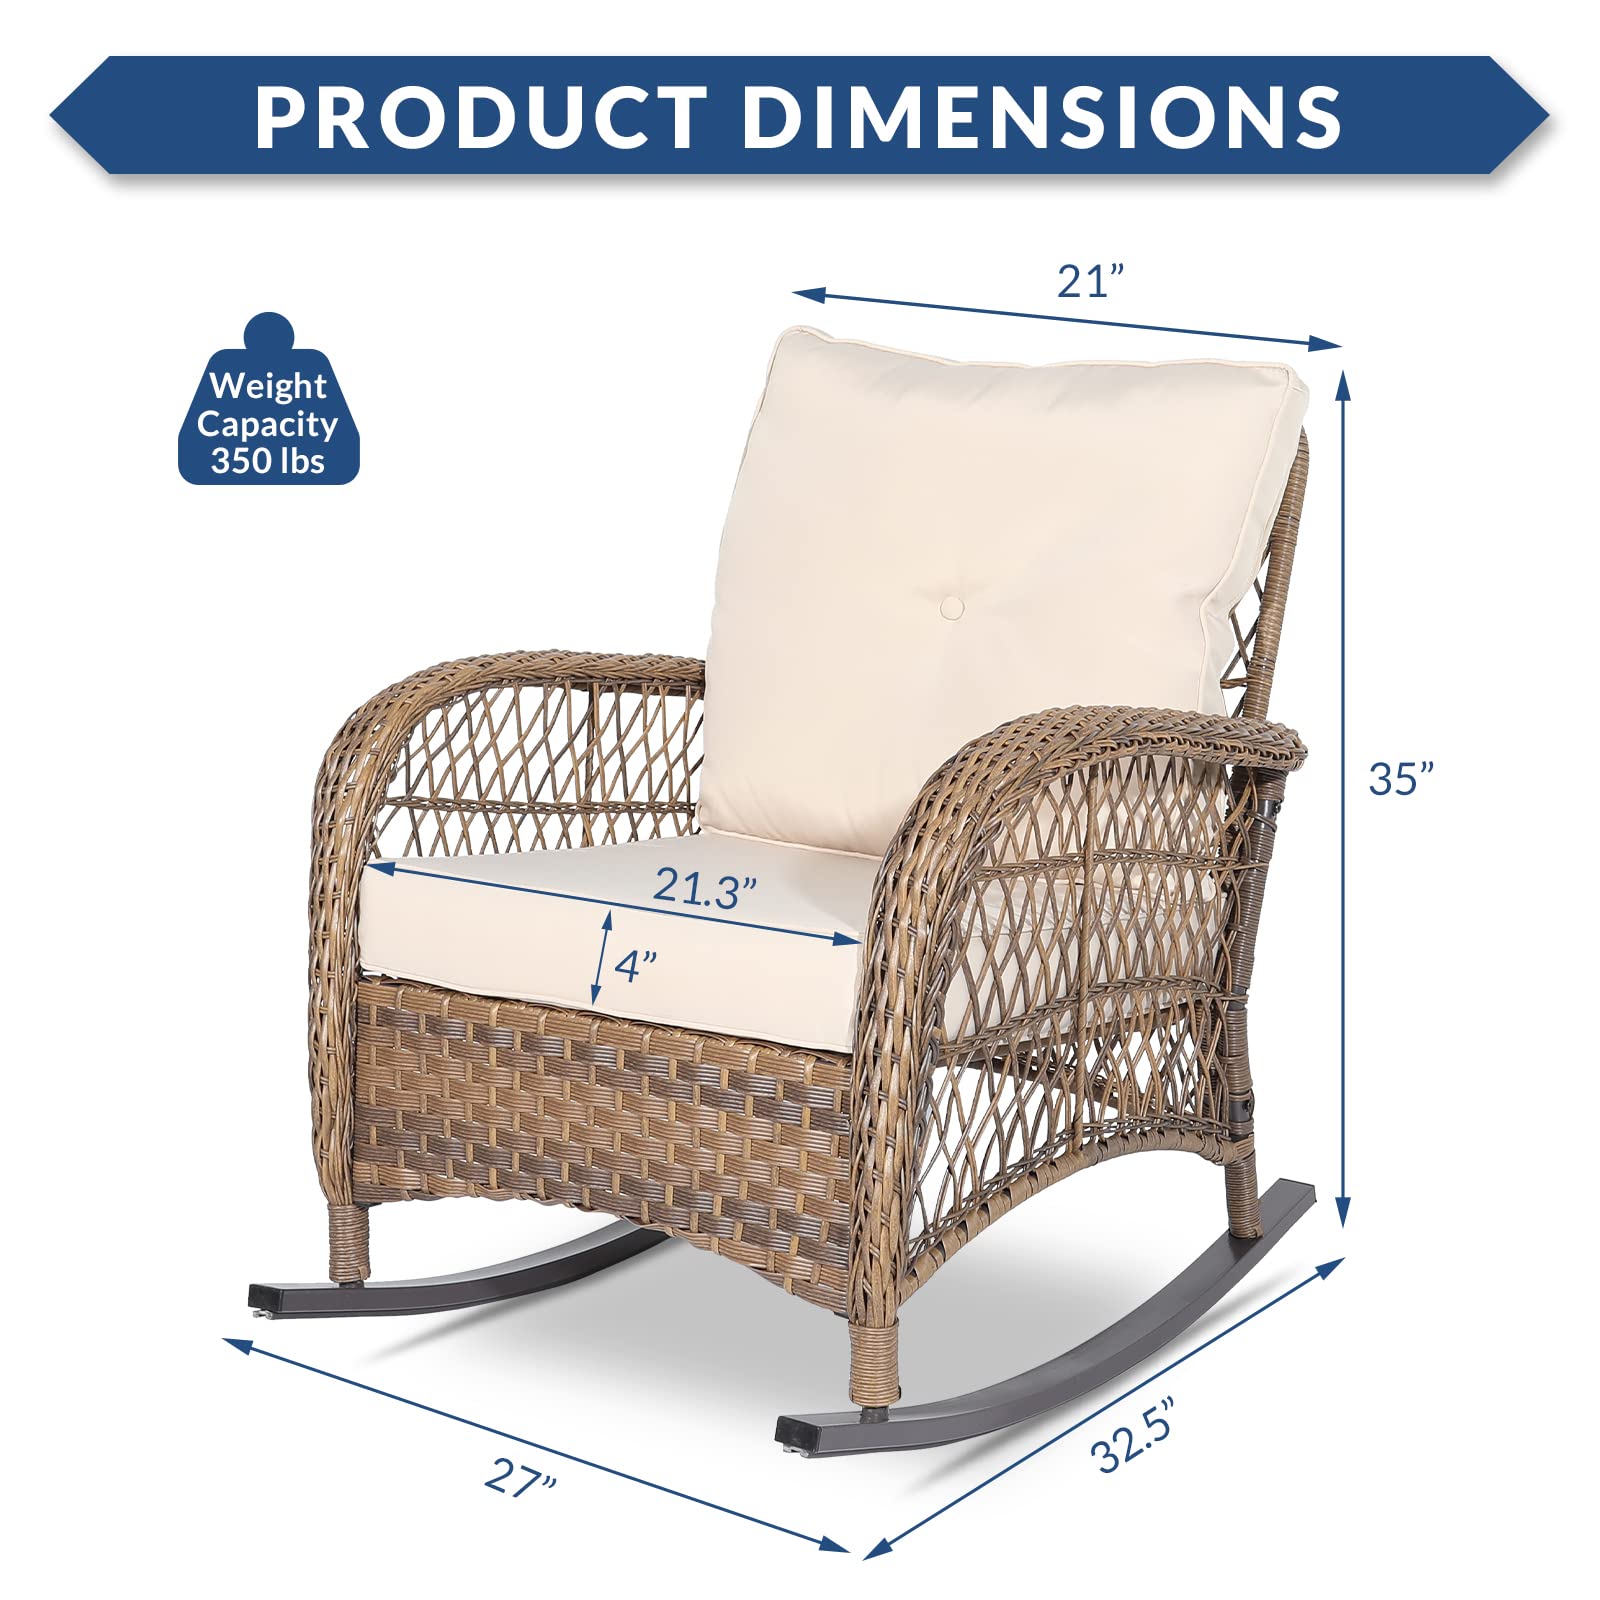 SOCIALCOMFY Outdoor Wicker Rocking Chair, Patio Rattan Rocker Chair with Steel Frame, Rocking Lawn Chair Patio Furniture, Light Brown Wicker & Beige Cushions, Set of 2 - image 3 of 7